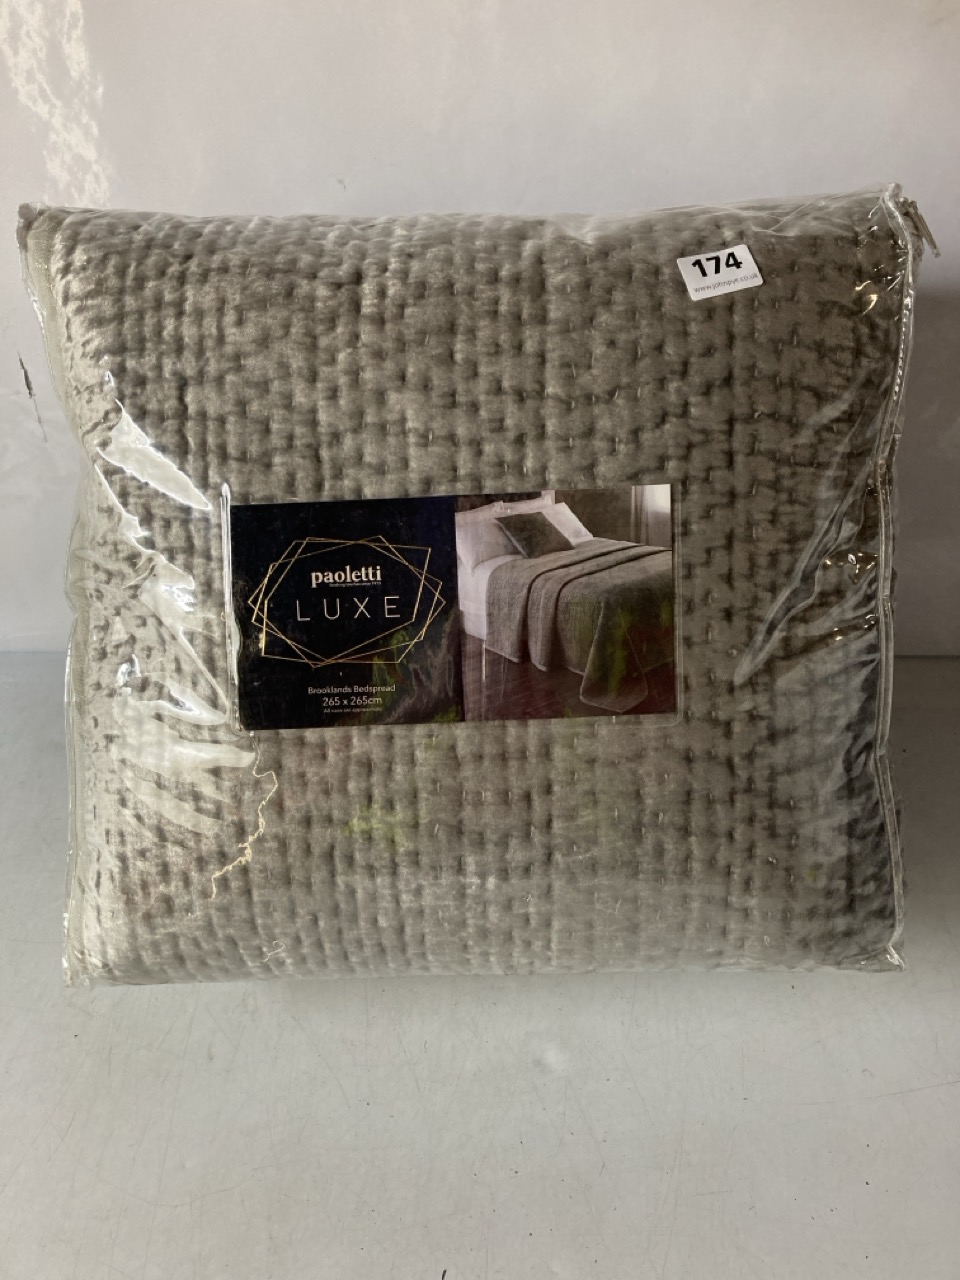 A PAOLETTI LUX BROOKLANDS BEDSPREAD, 265 X 265 CM RRP £195.00